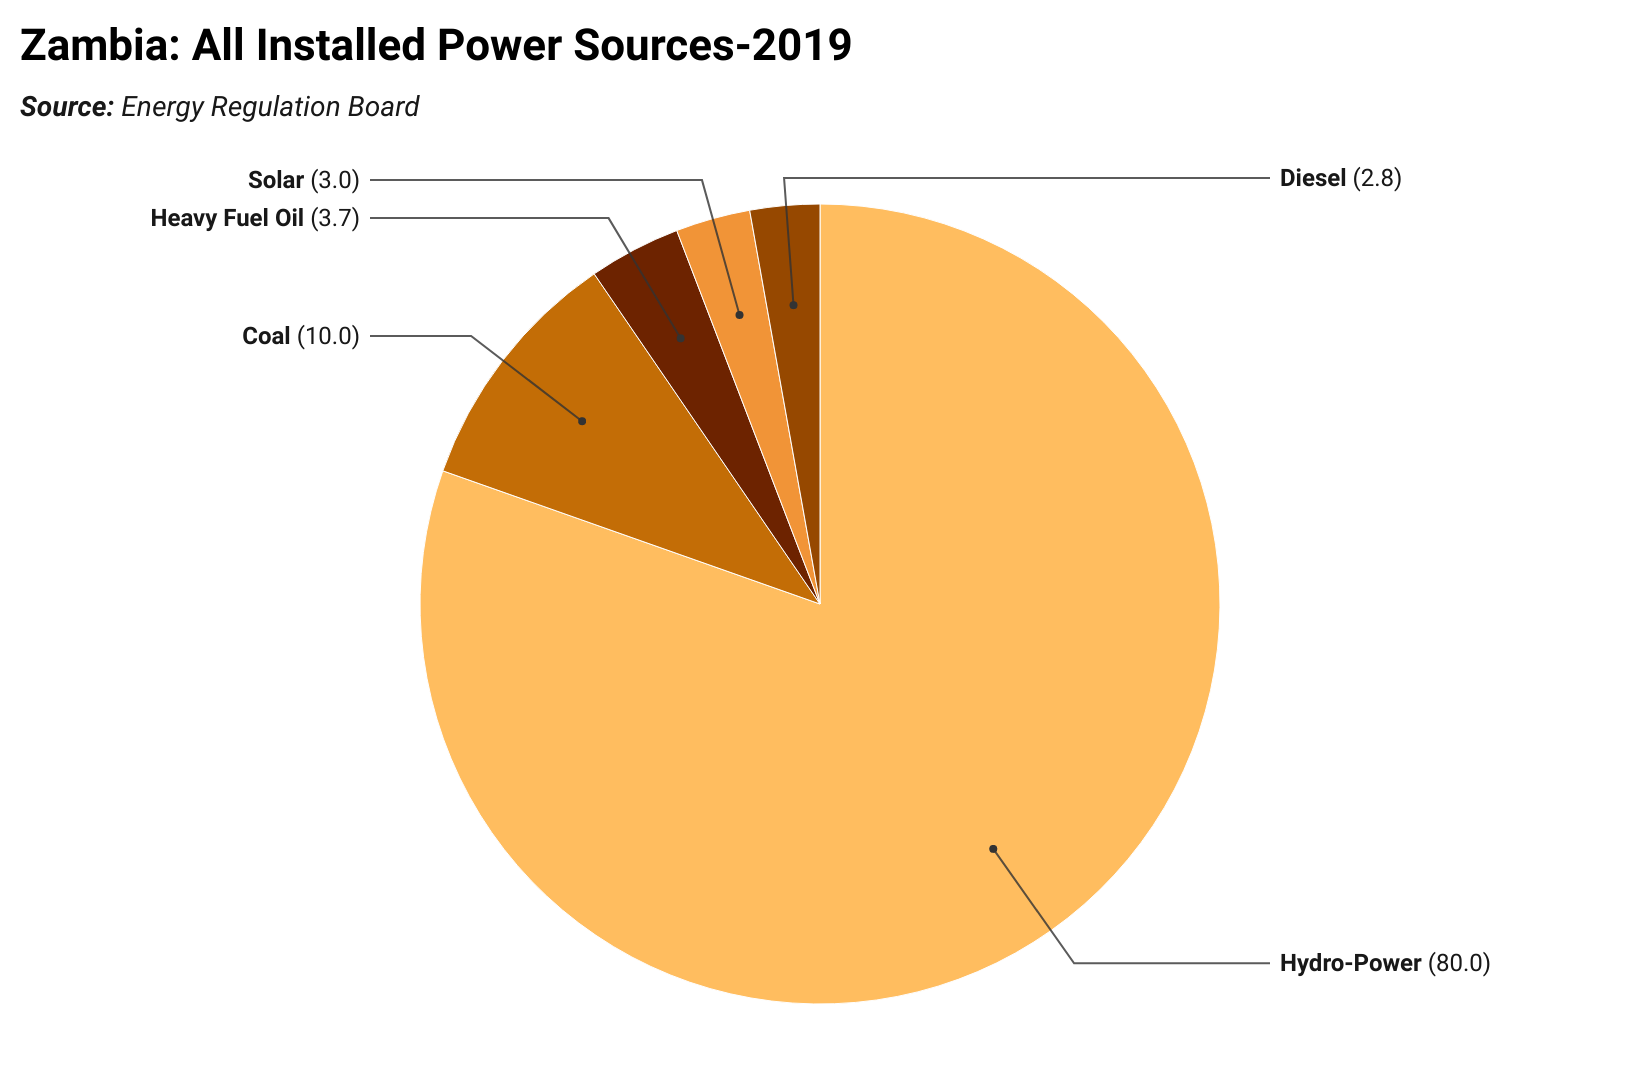 Pie chart of hydro-power sources in Zambia